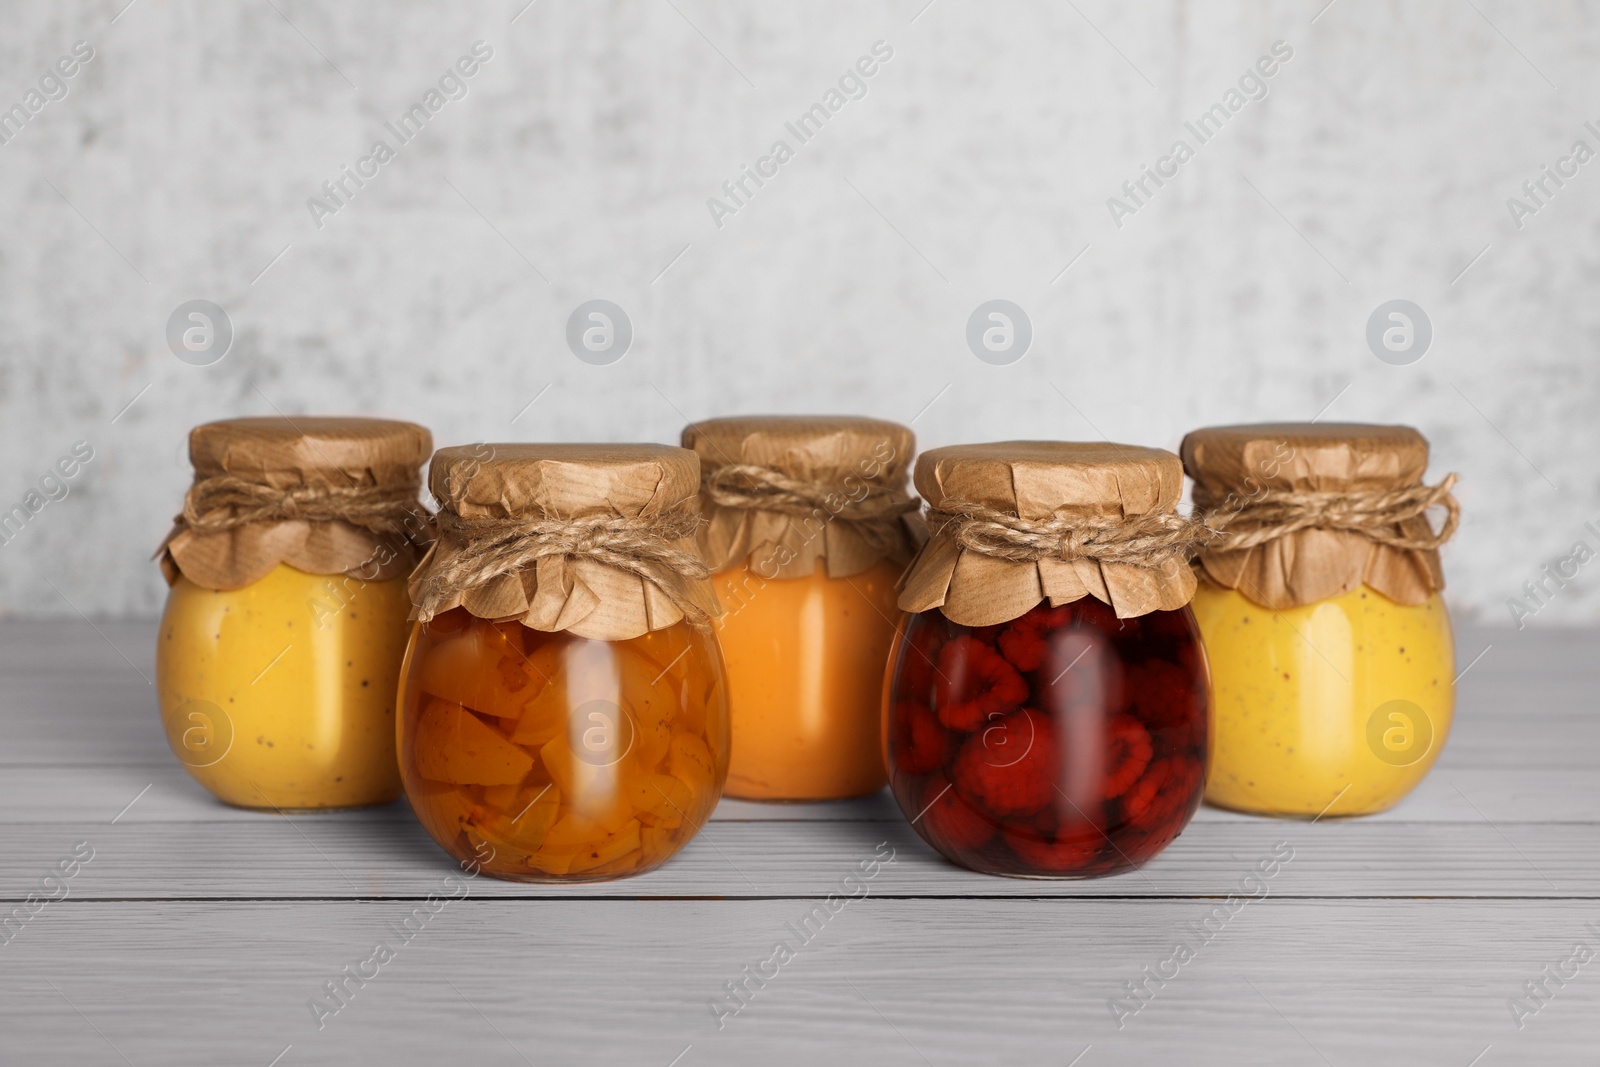 Photo of Jars with canned fruit jams on wooden table